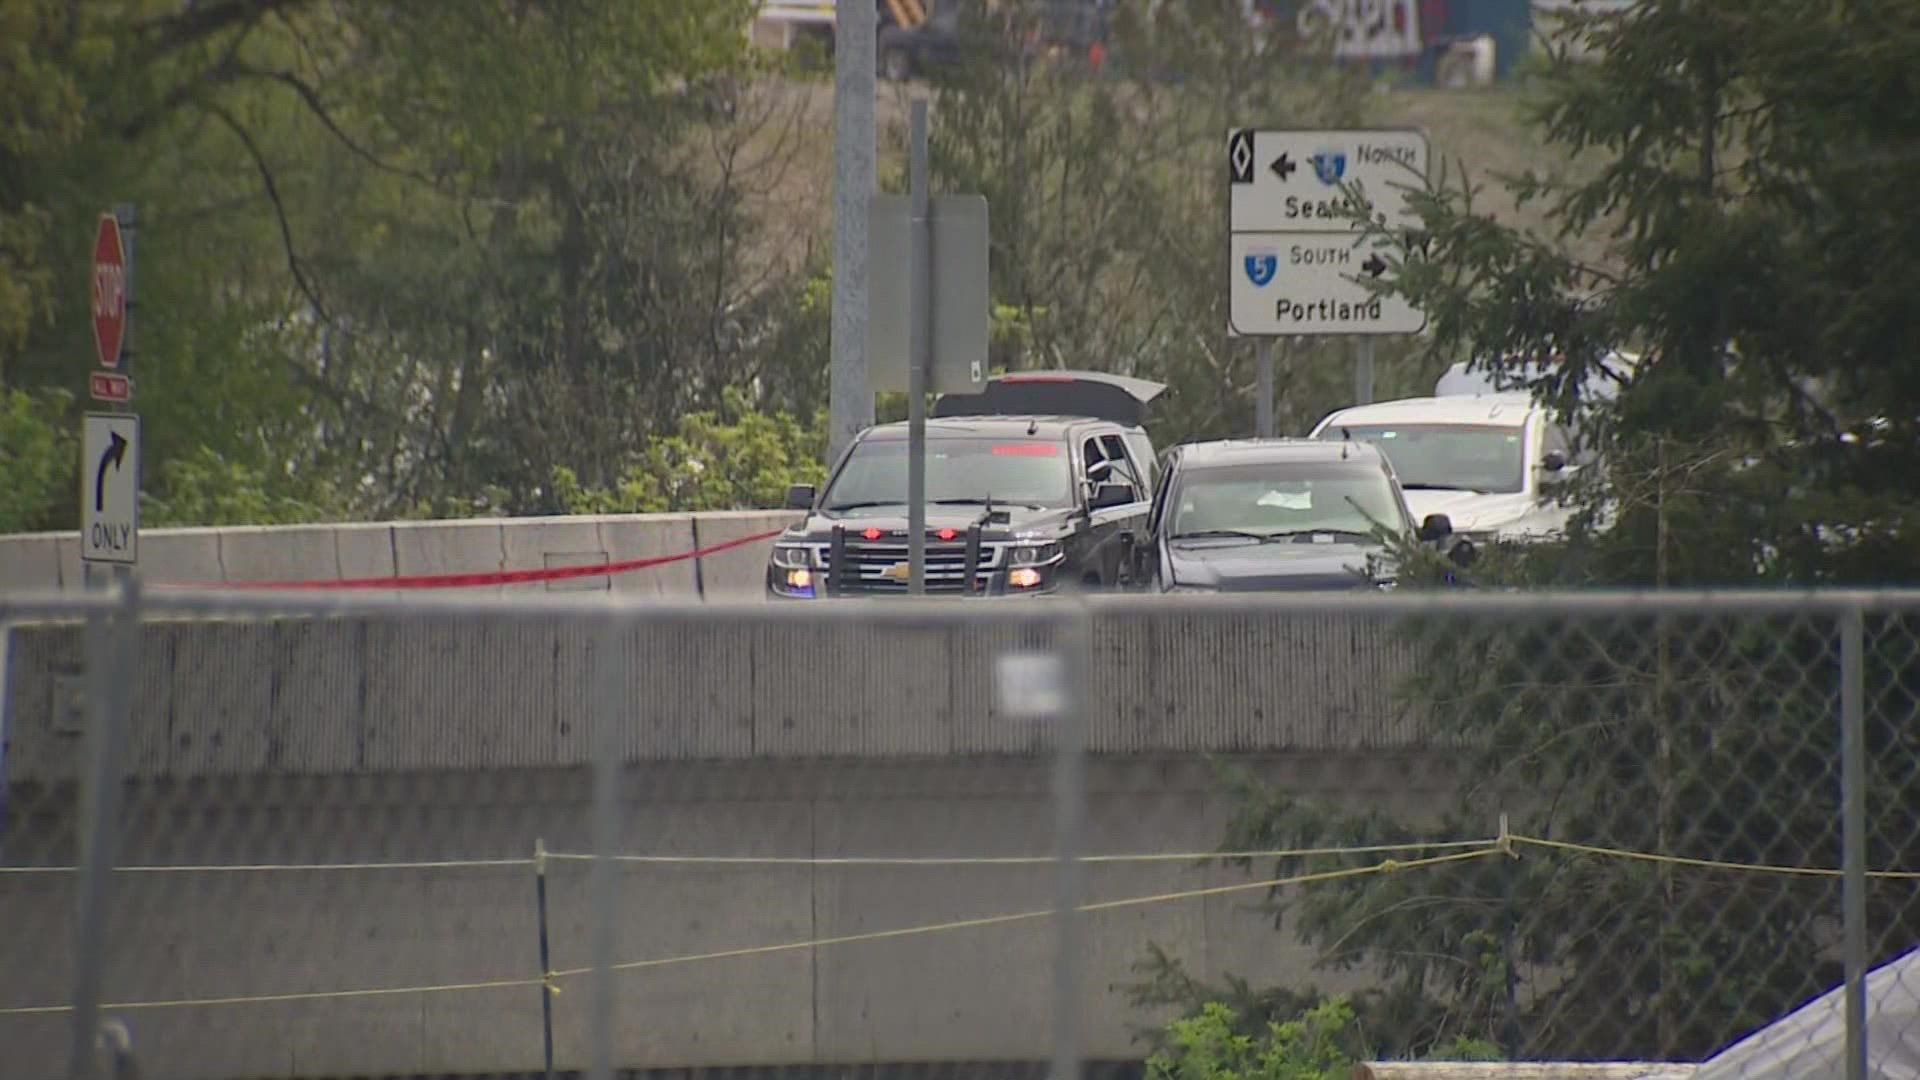 A suspect was killed by a King County SWAT team member, according to officials.